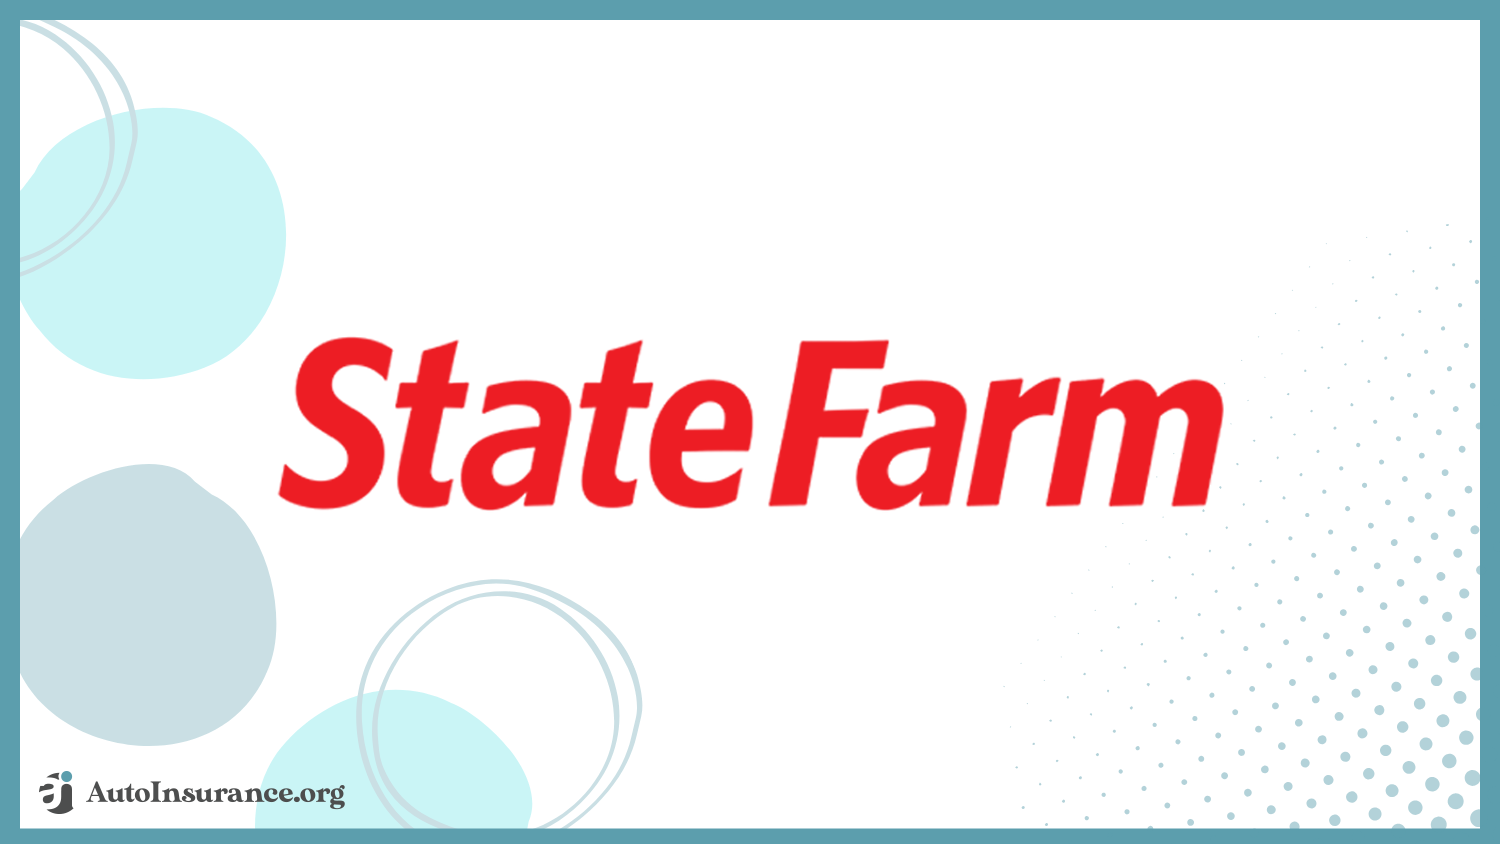 State Farm: Best Auto Insurance for Real Estate Agents